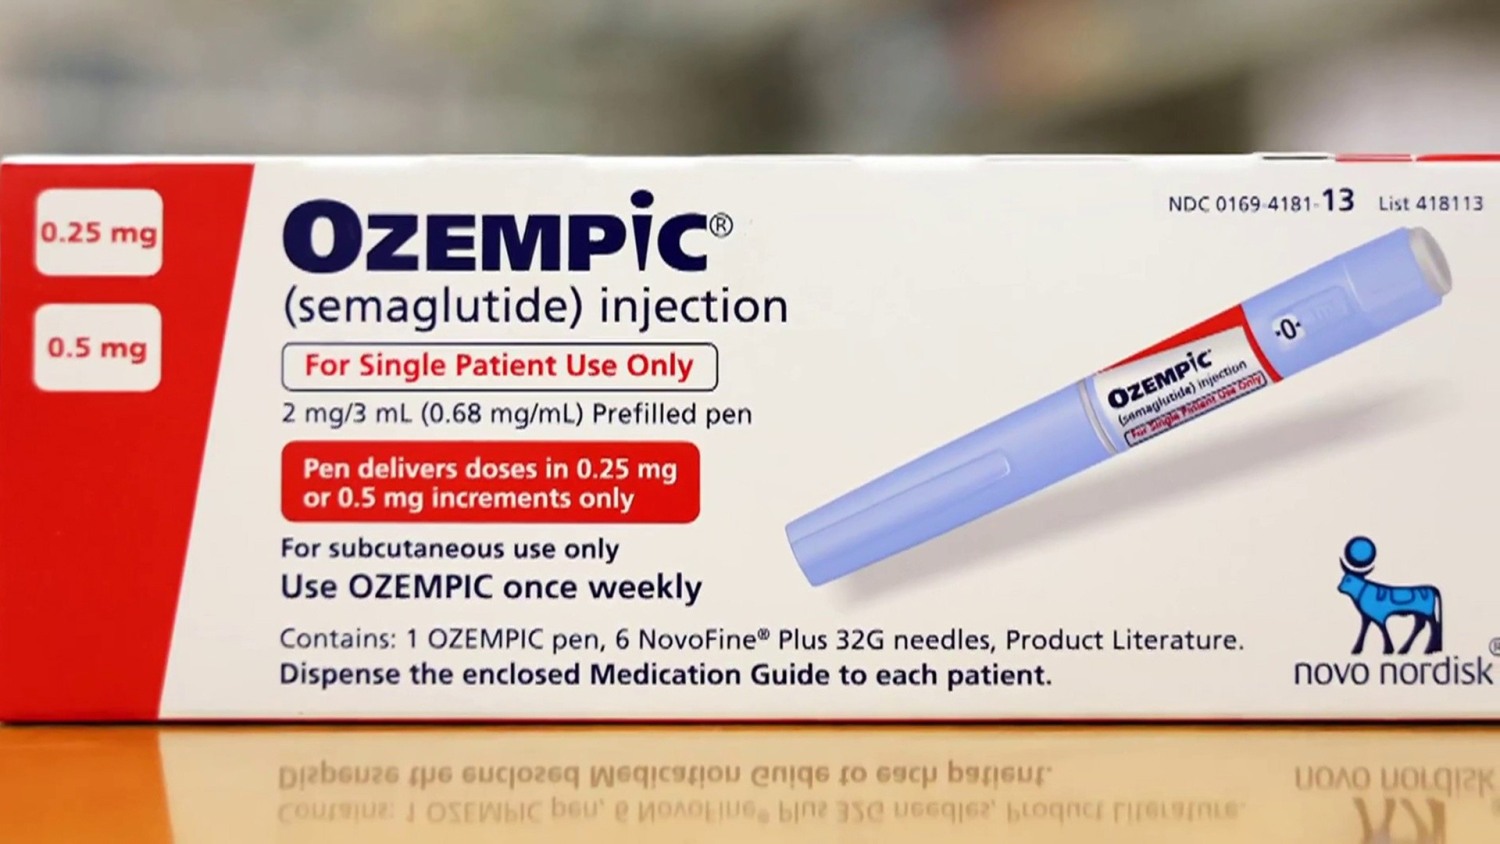 Ozempic and Wegovy's side effects and pregnancy risks need more attention -  Vox